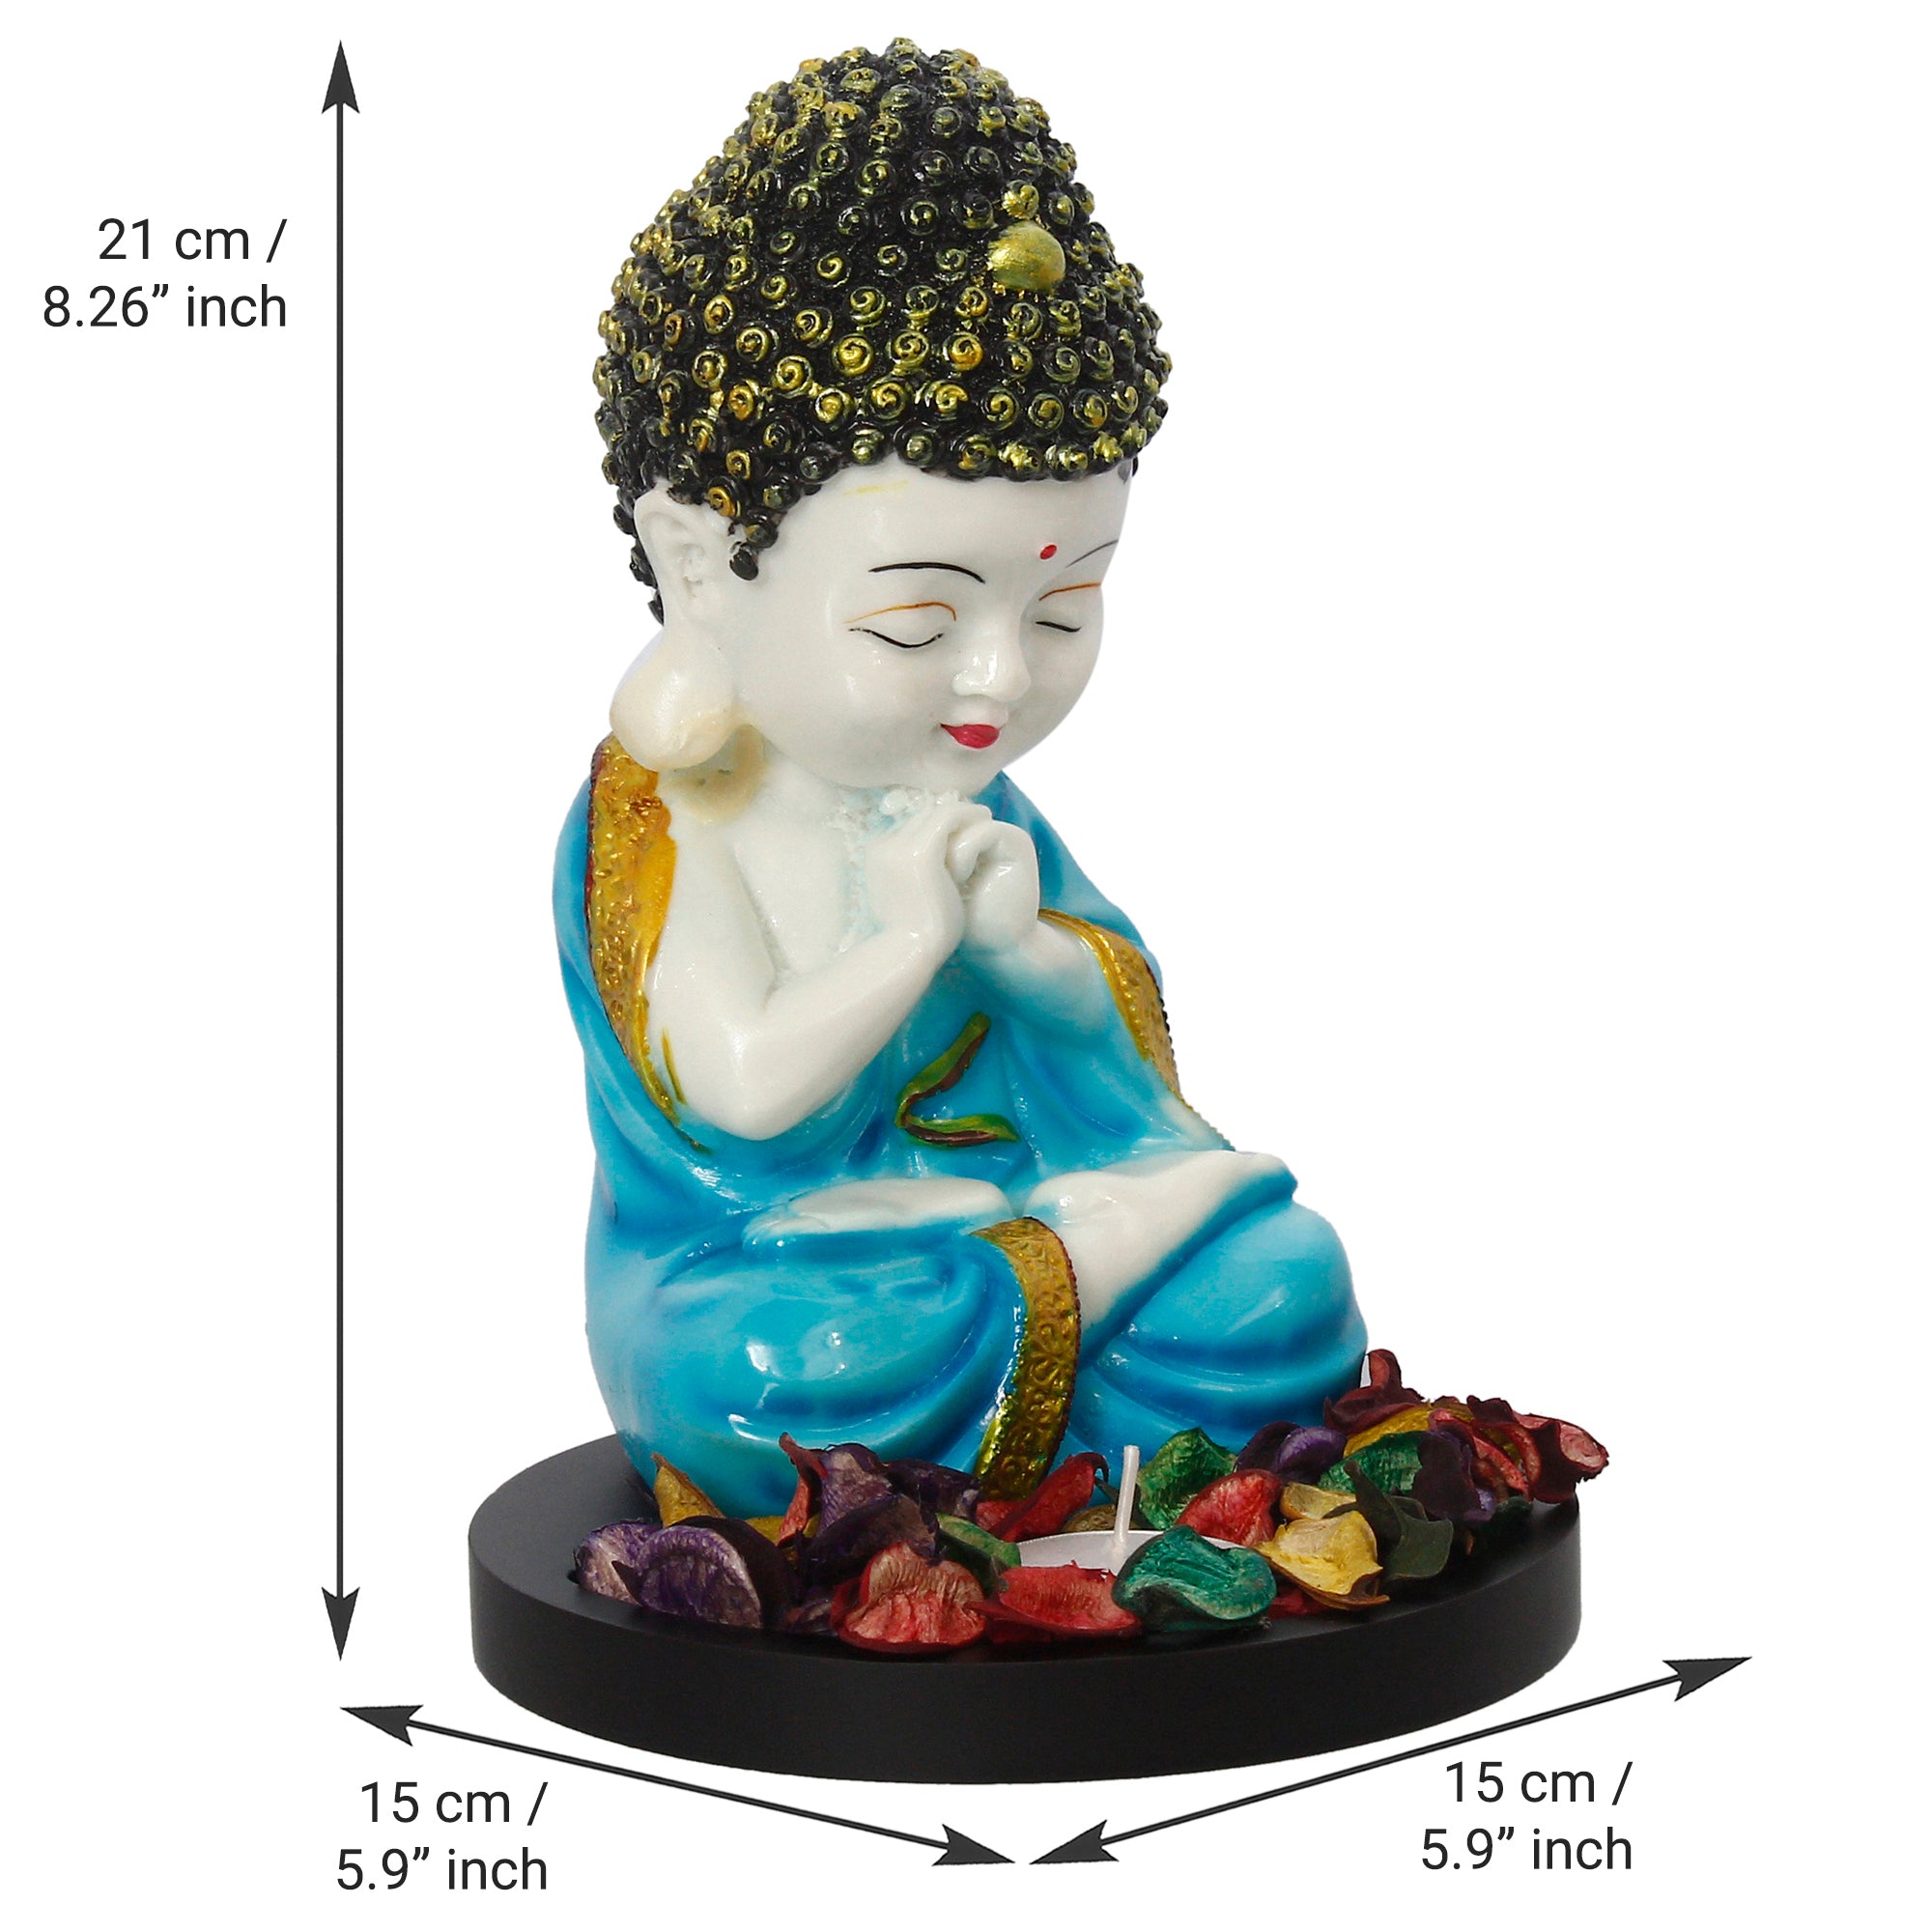 Polyresin Blue and White Praying Monk Buddha Statue with Wooden Base, Fragranced Petals and Tealight 3